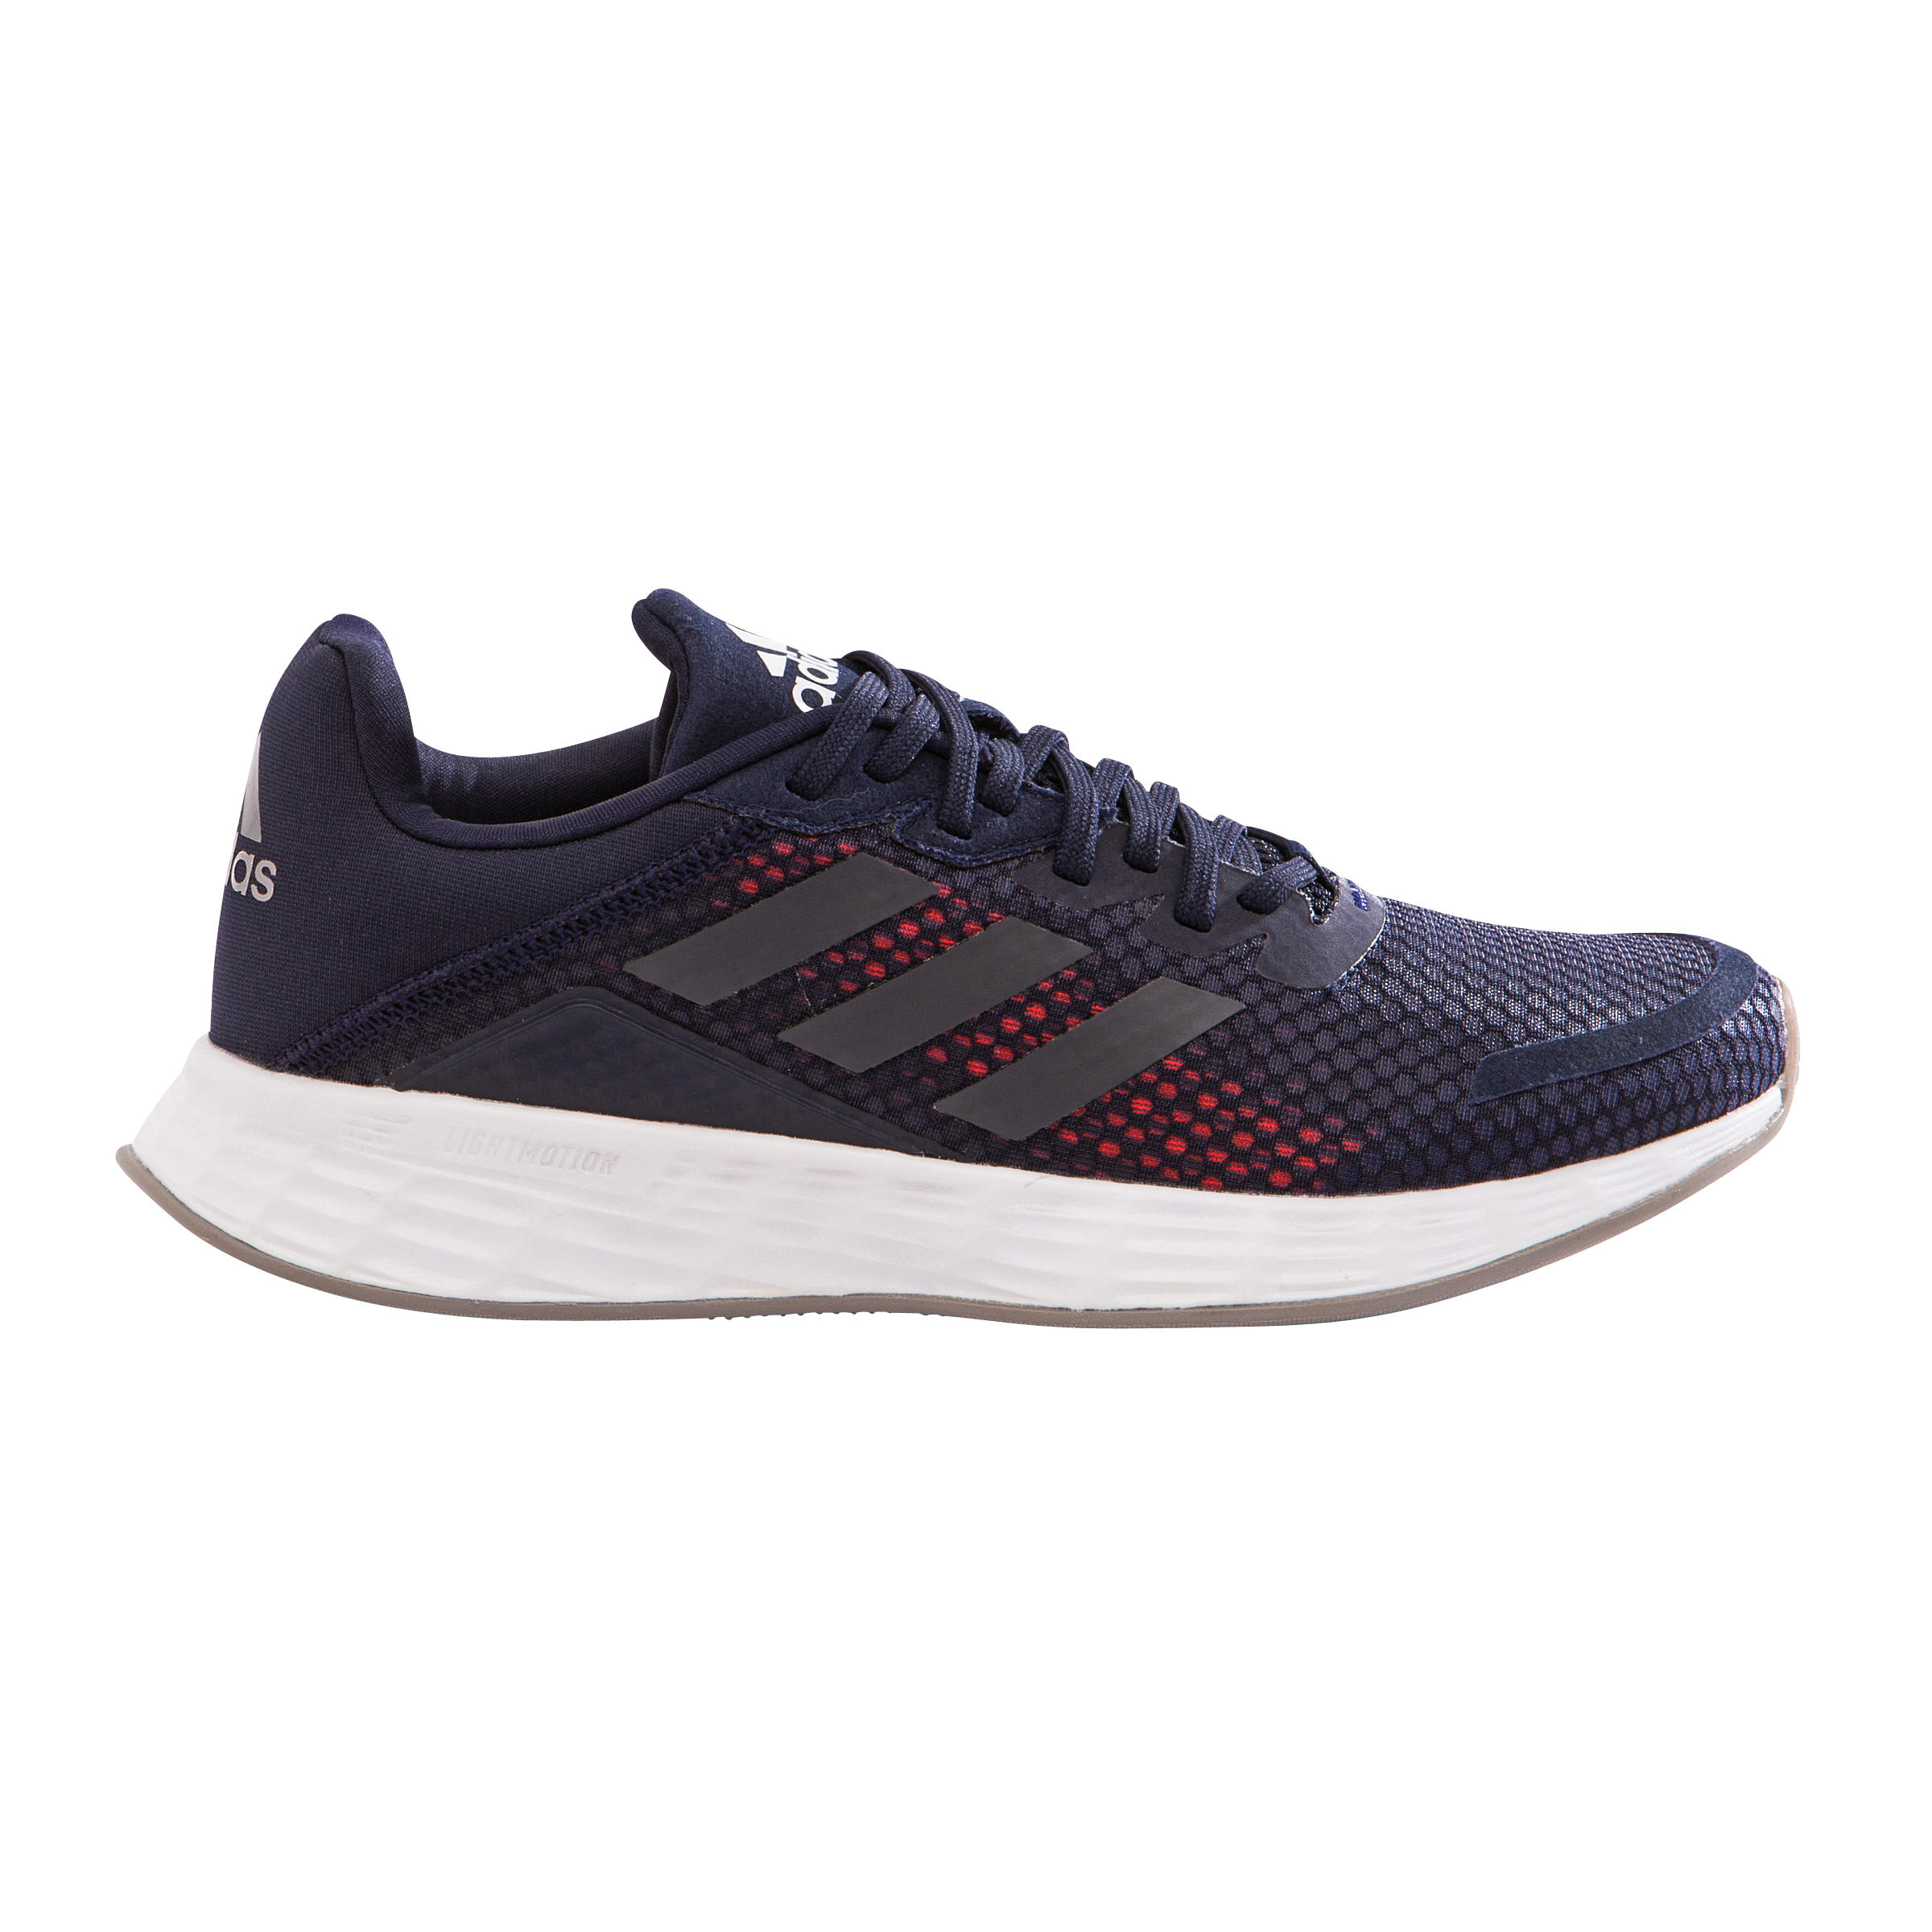 chaussure adidas homme decathlon Off 56% - www.bashhguidelines.org